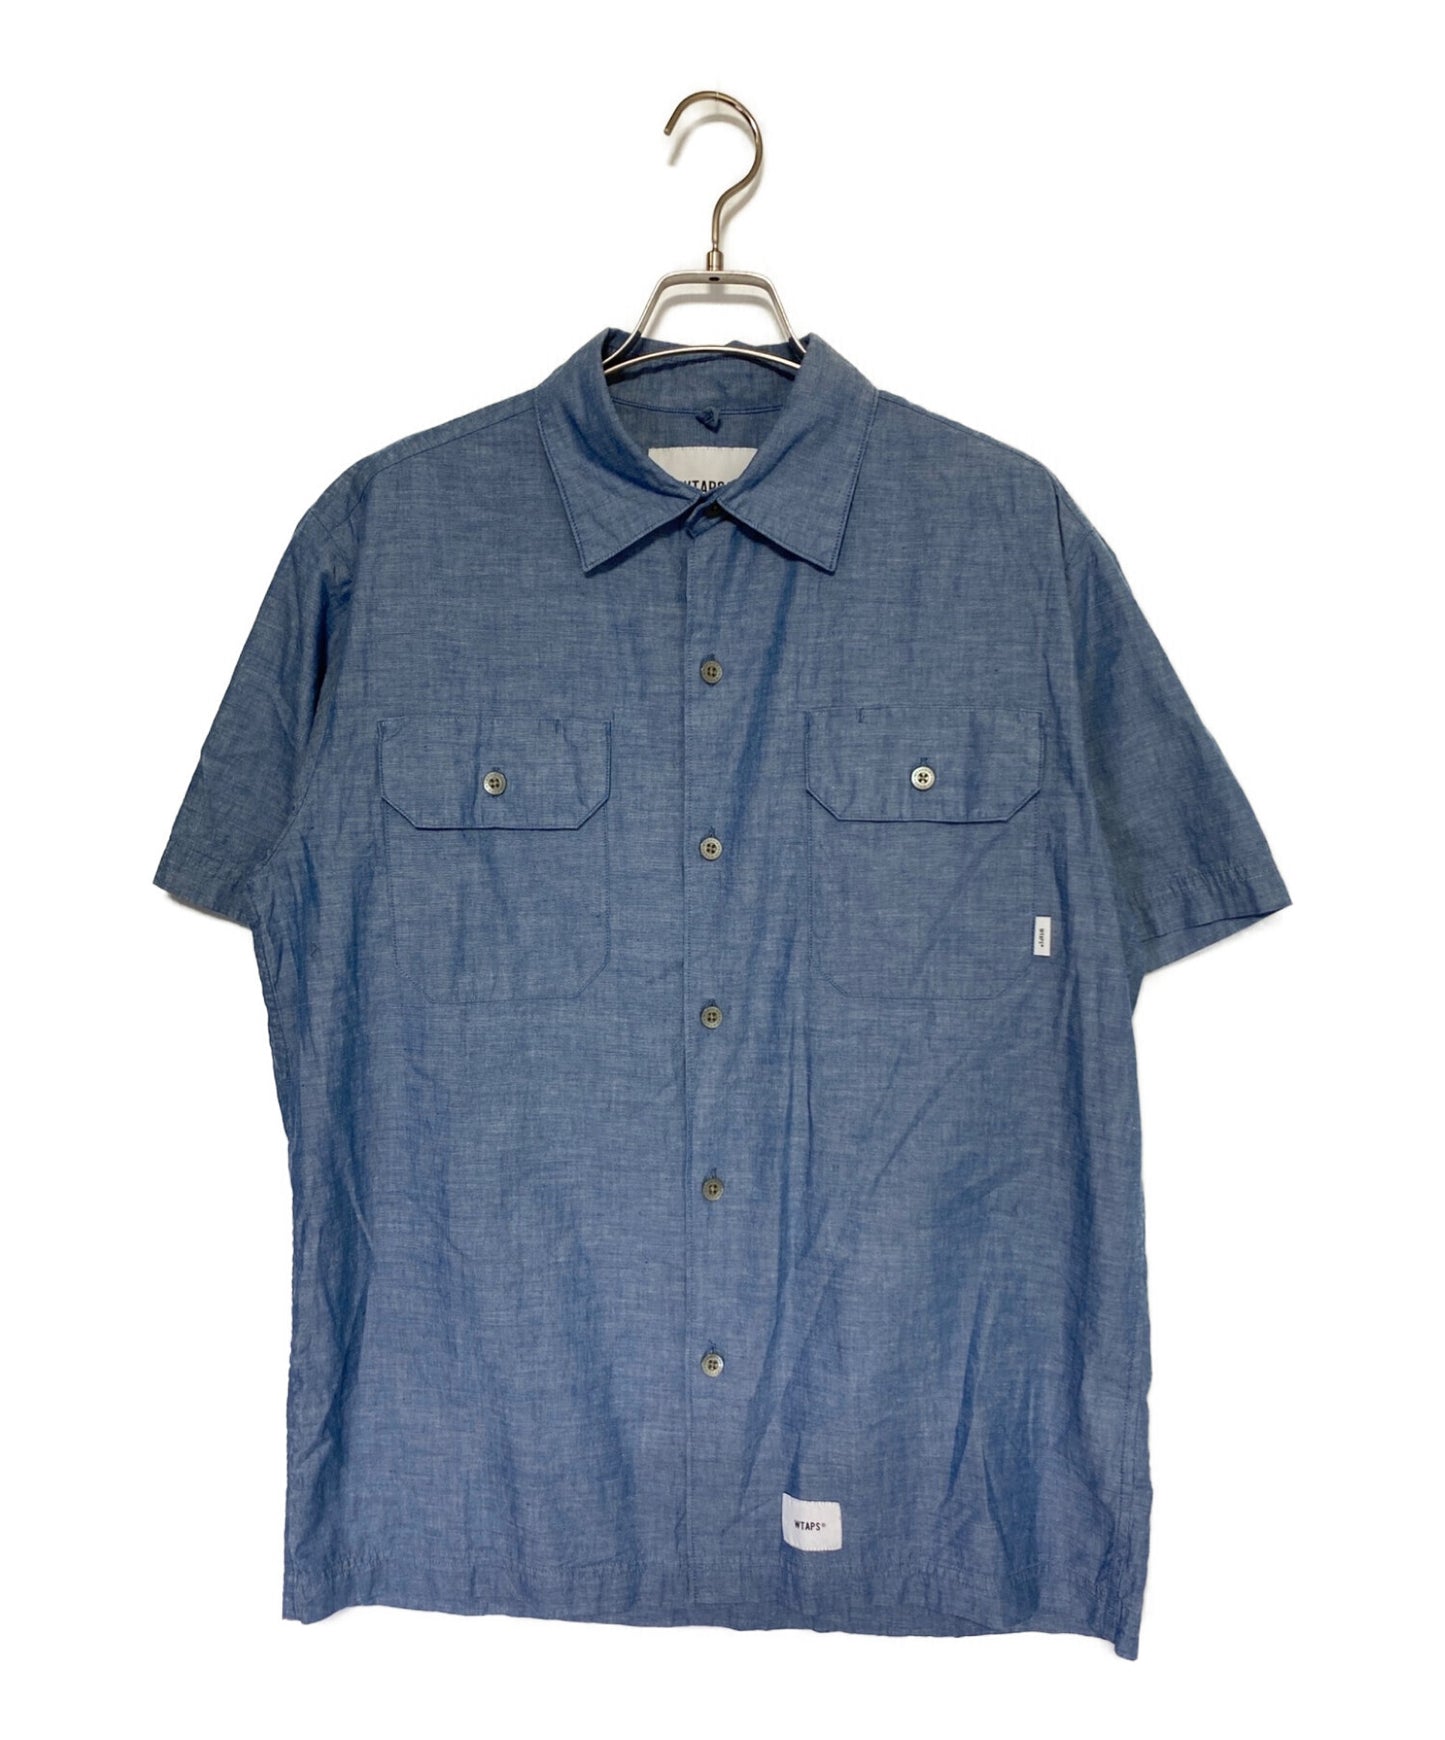 [Pre-owned] WTAPS DECK S/S SHIRT 201wvdt-shm05